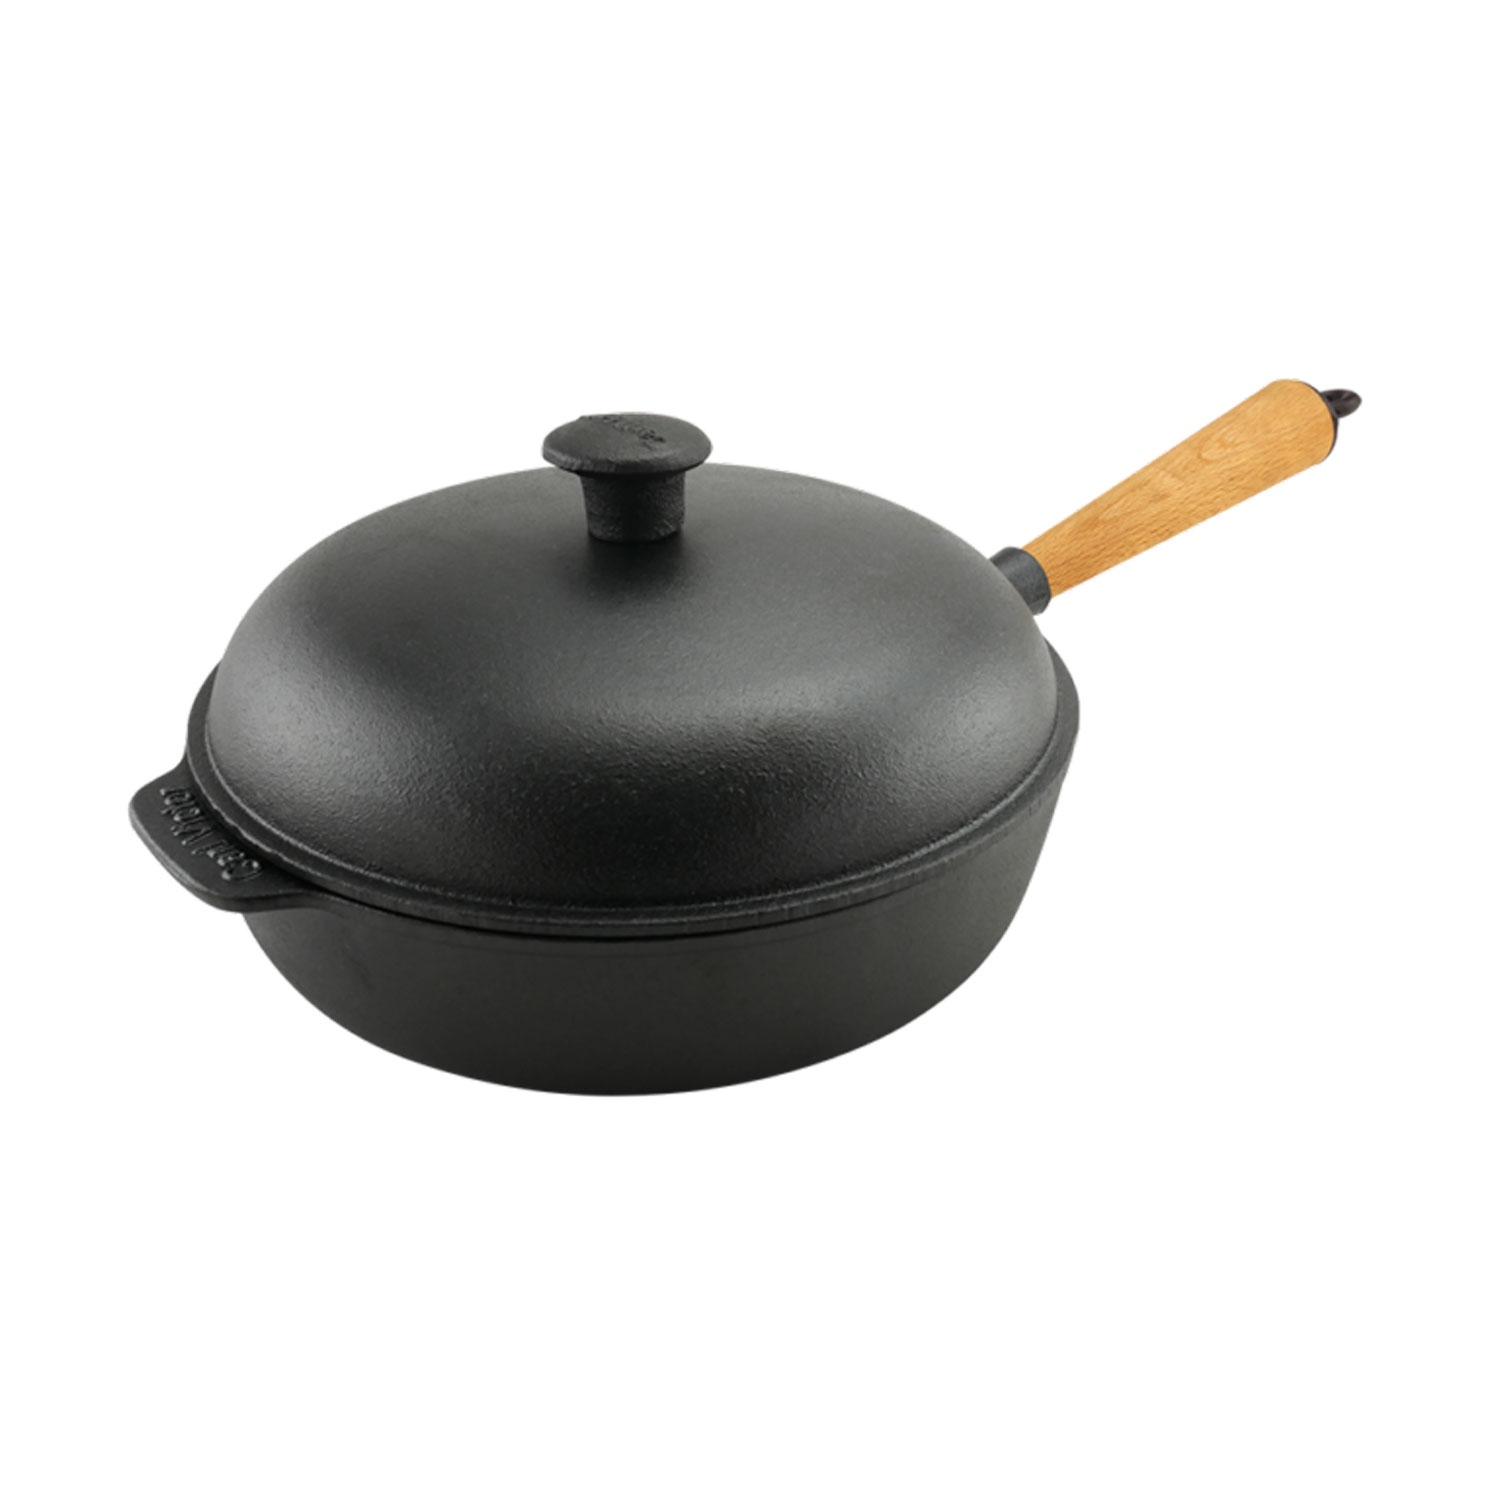 Carl Victor Squared Grill Pan 28x28 cm with Steel Handle - Grill Pans Cast Iron Black - CVG283S